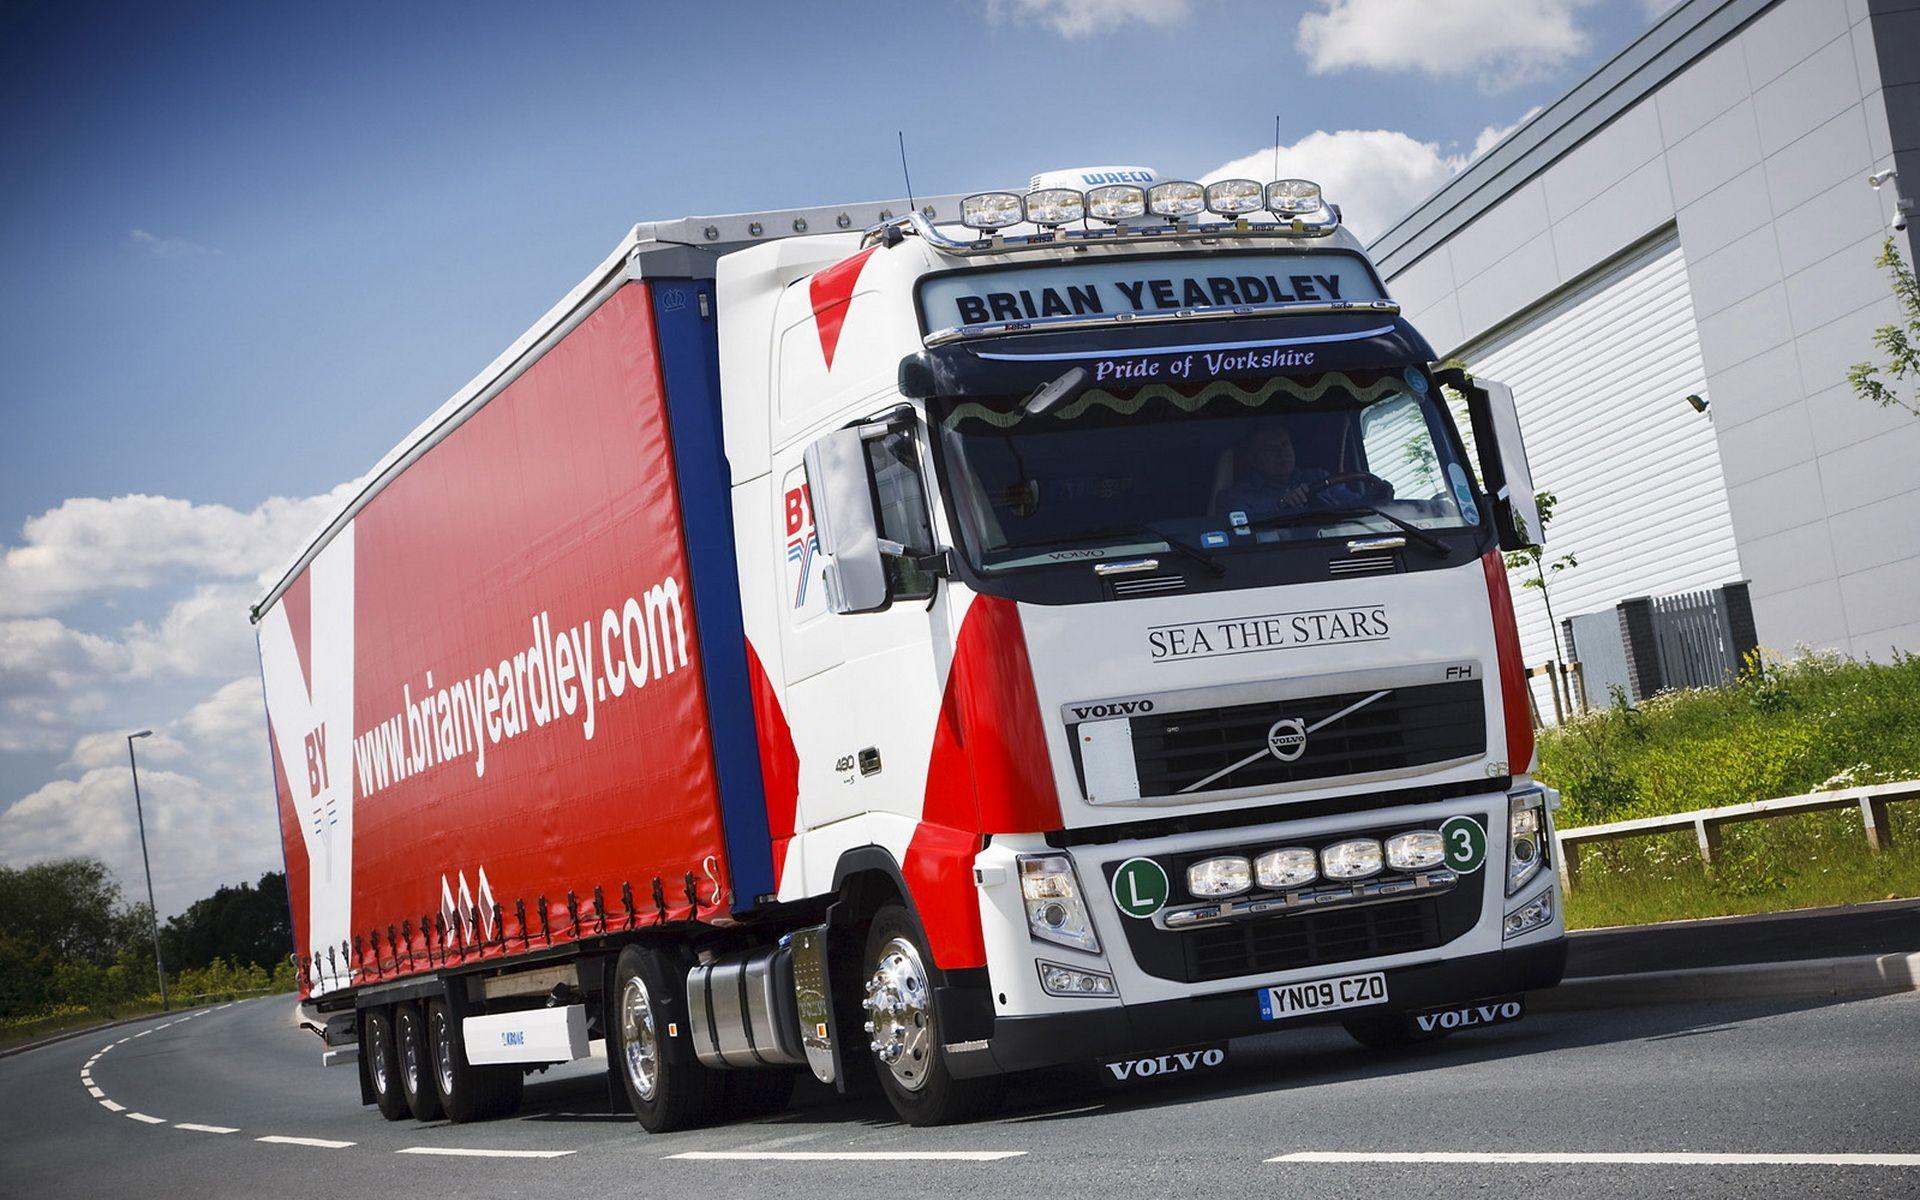 Volvo Fh 480 6x2 wallpaper and image, picture, photo